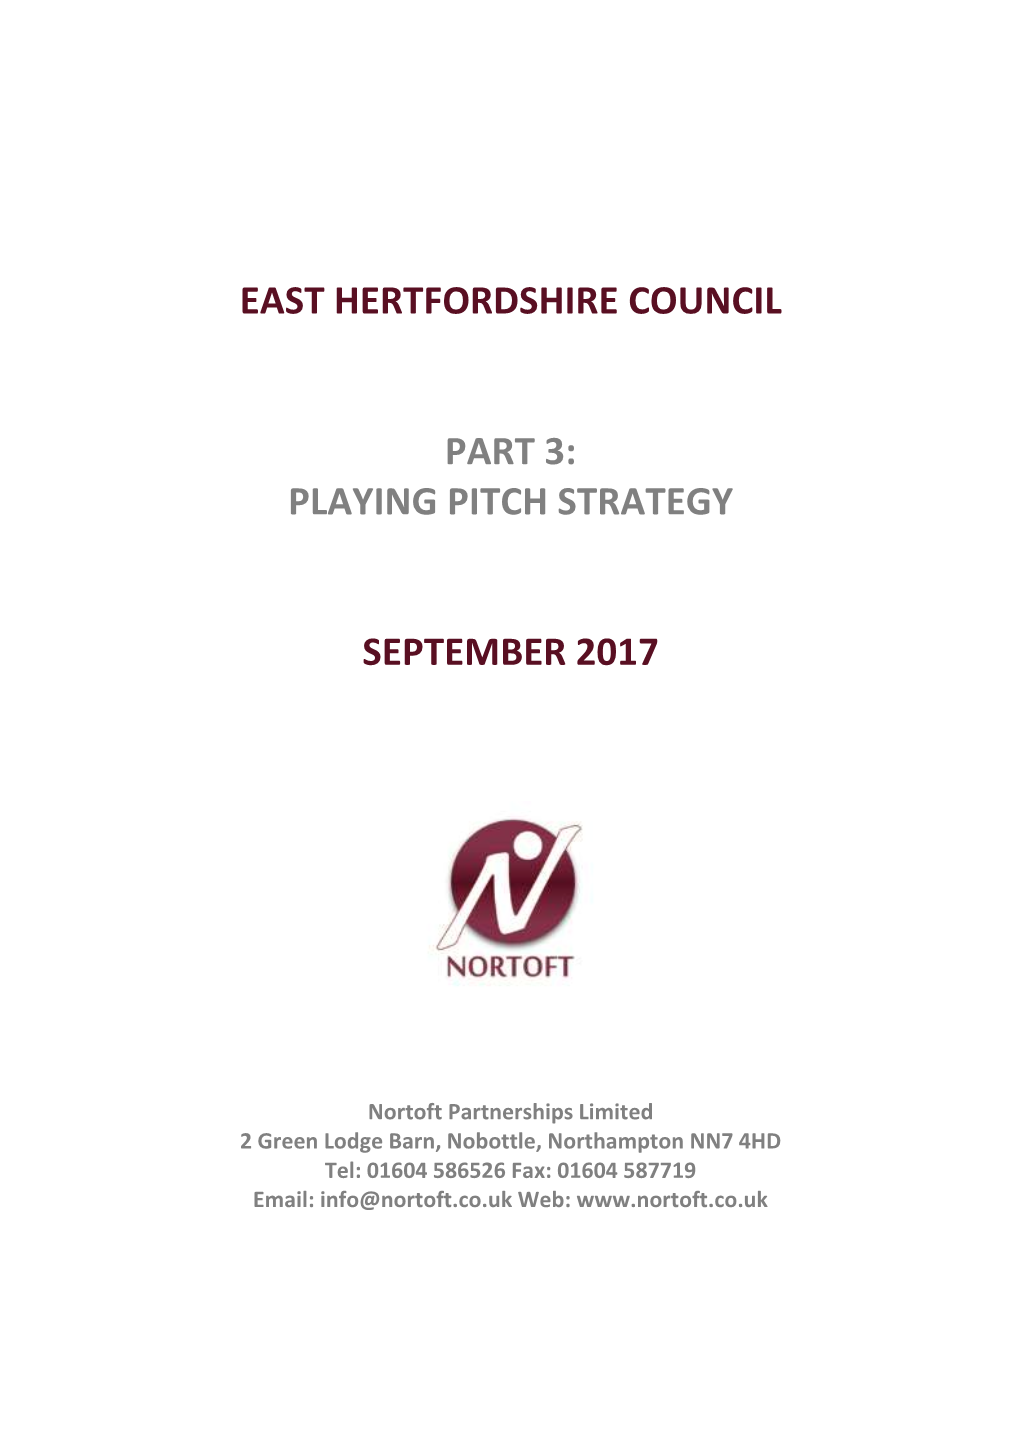 East Hertfordshire Council Part 3: Playing Pitch